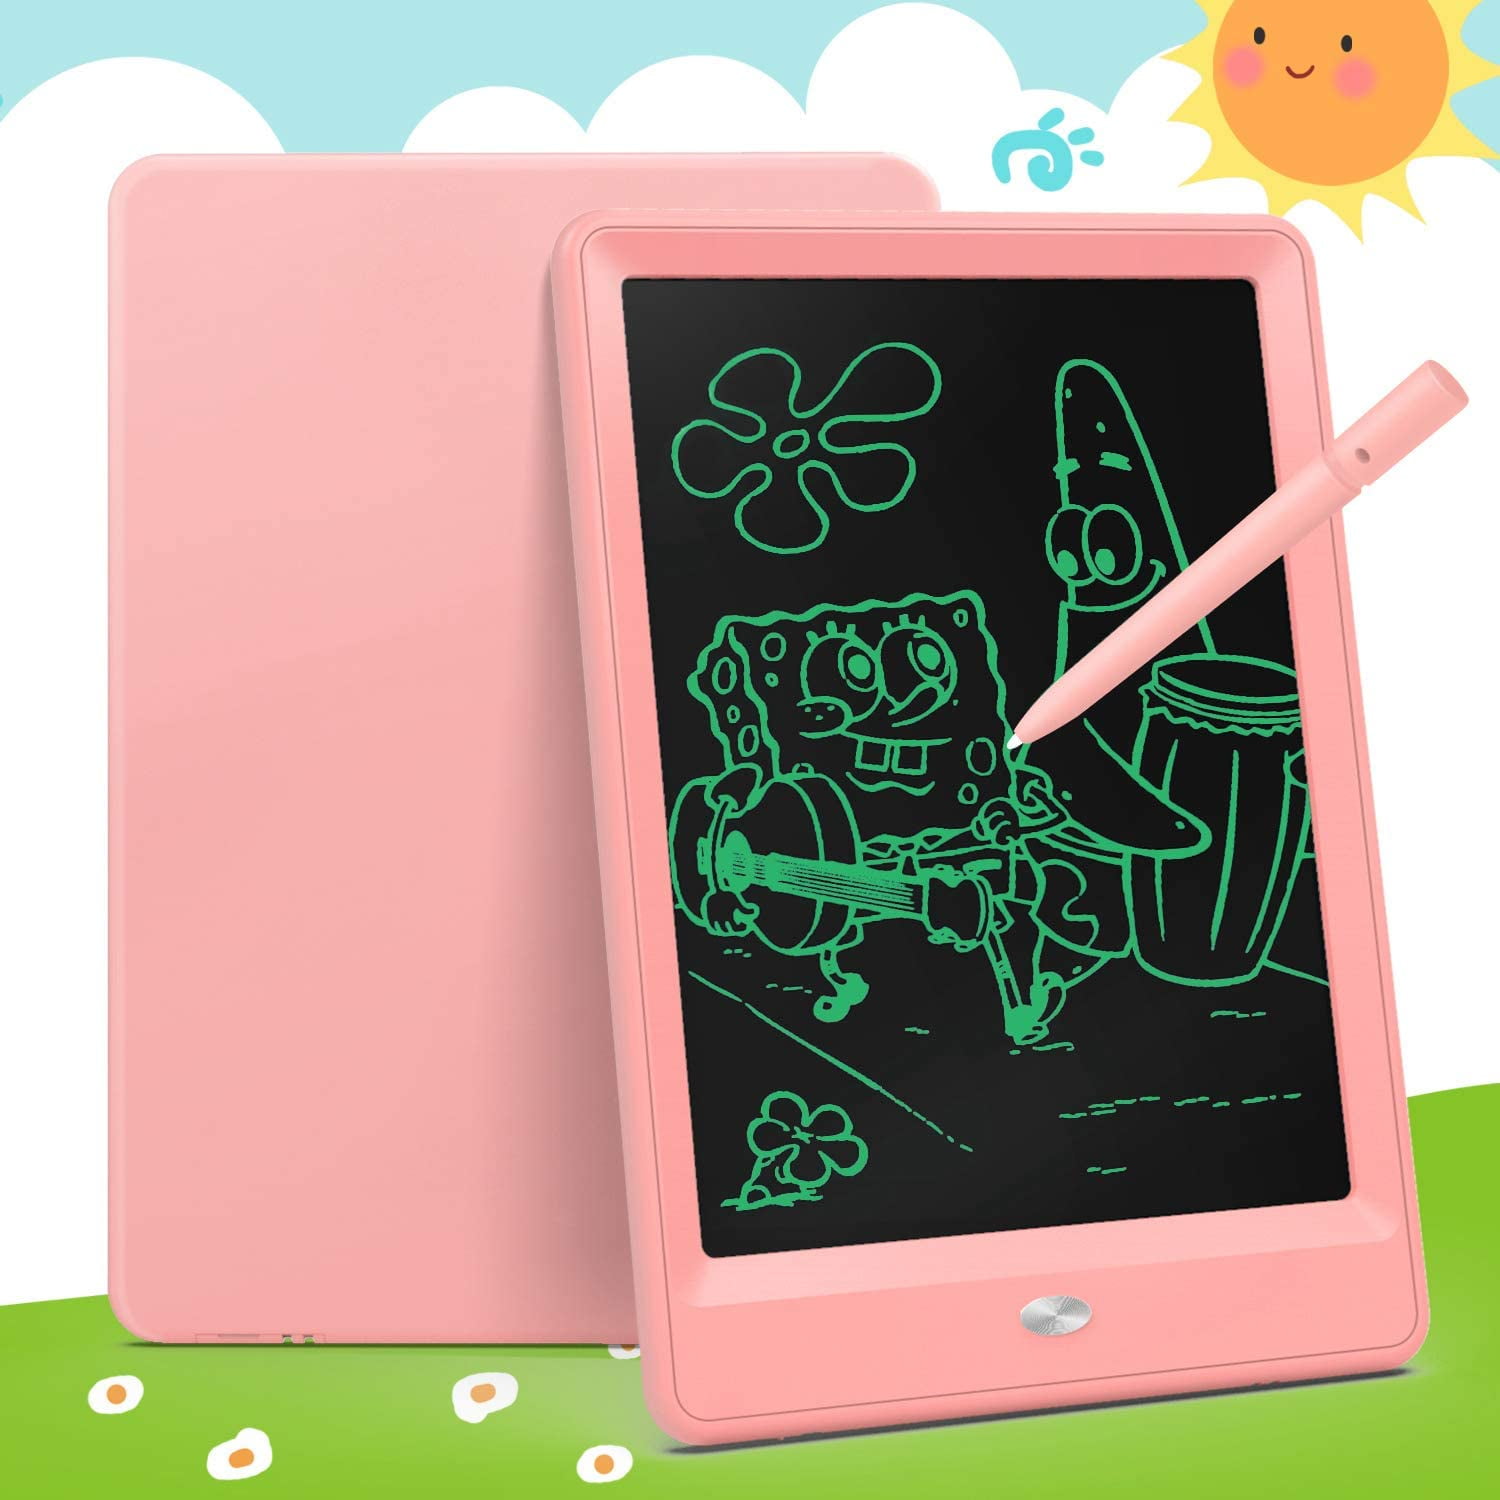 Children Eye Protection Doodle Pad Color Drawing Board Ultra-Thin Waterproof LCD Writing Tablet with One-Key Clear Travel Size Graffiti Board Toy Gifts for Kids Boys Girls Black, 6.5 inch